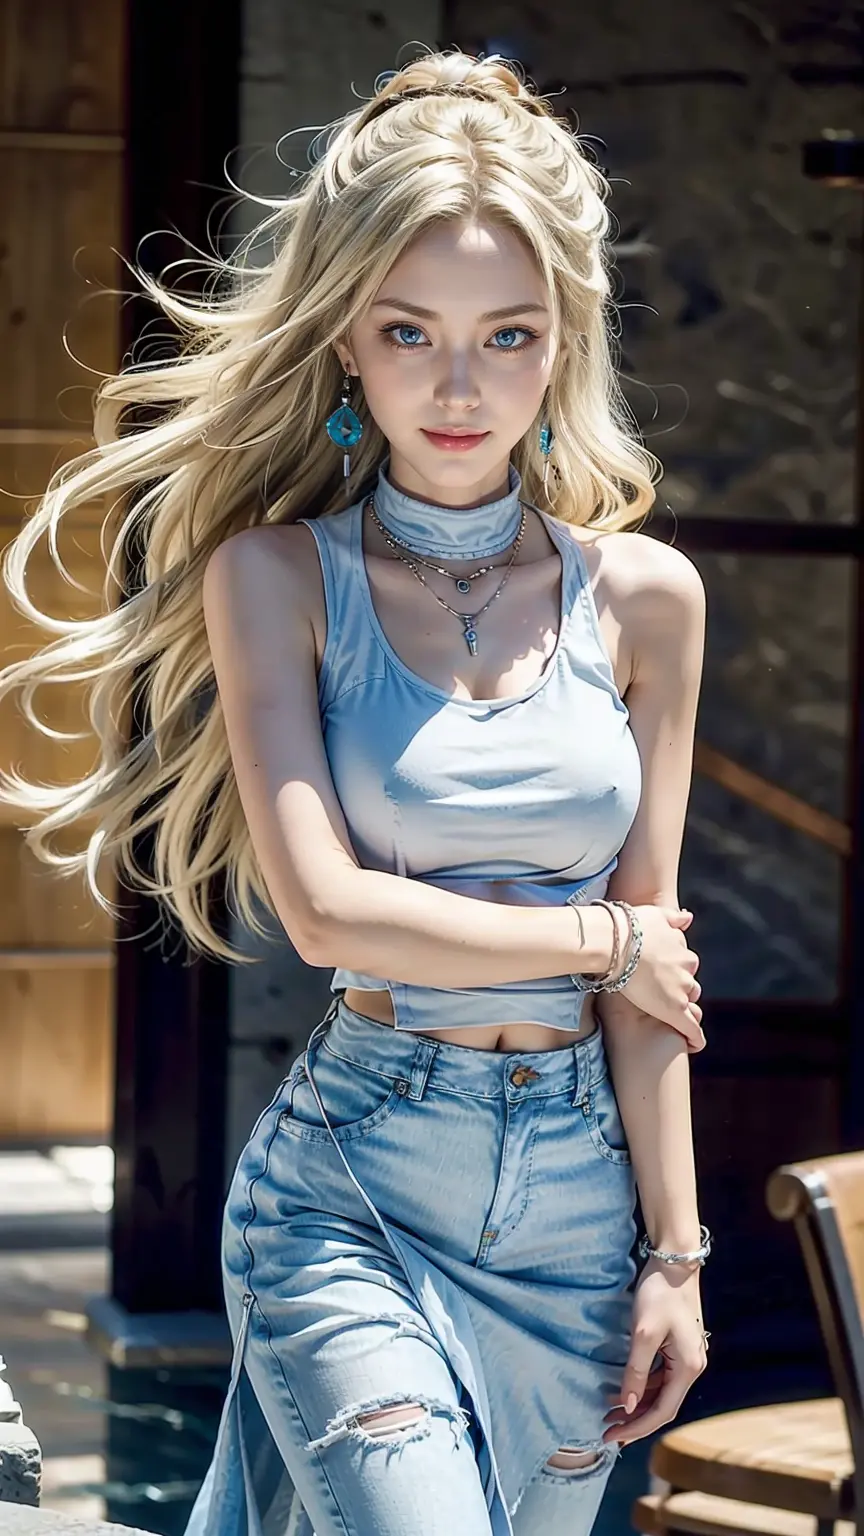 22 year old white female、hair color is blonde、blue eyes、long hair、The ends of the hair are wavy、accessories on wrist、wearing a n...